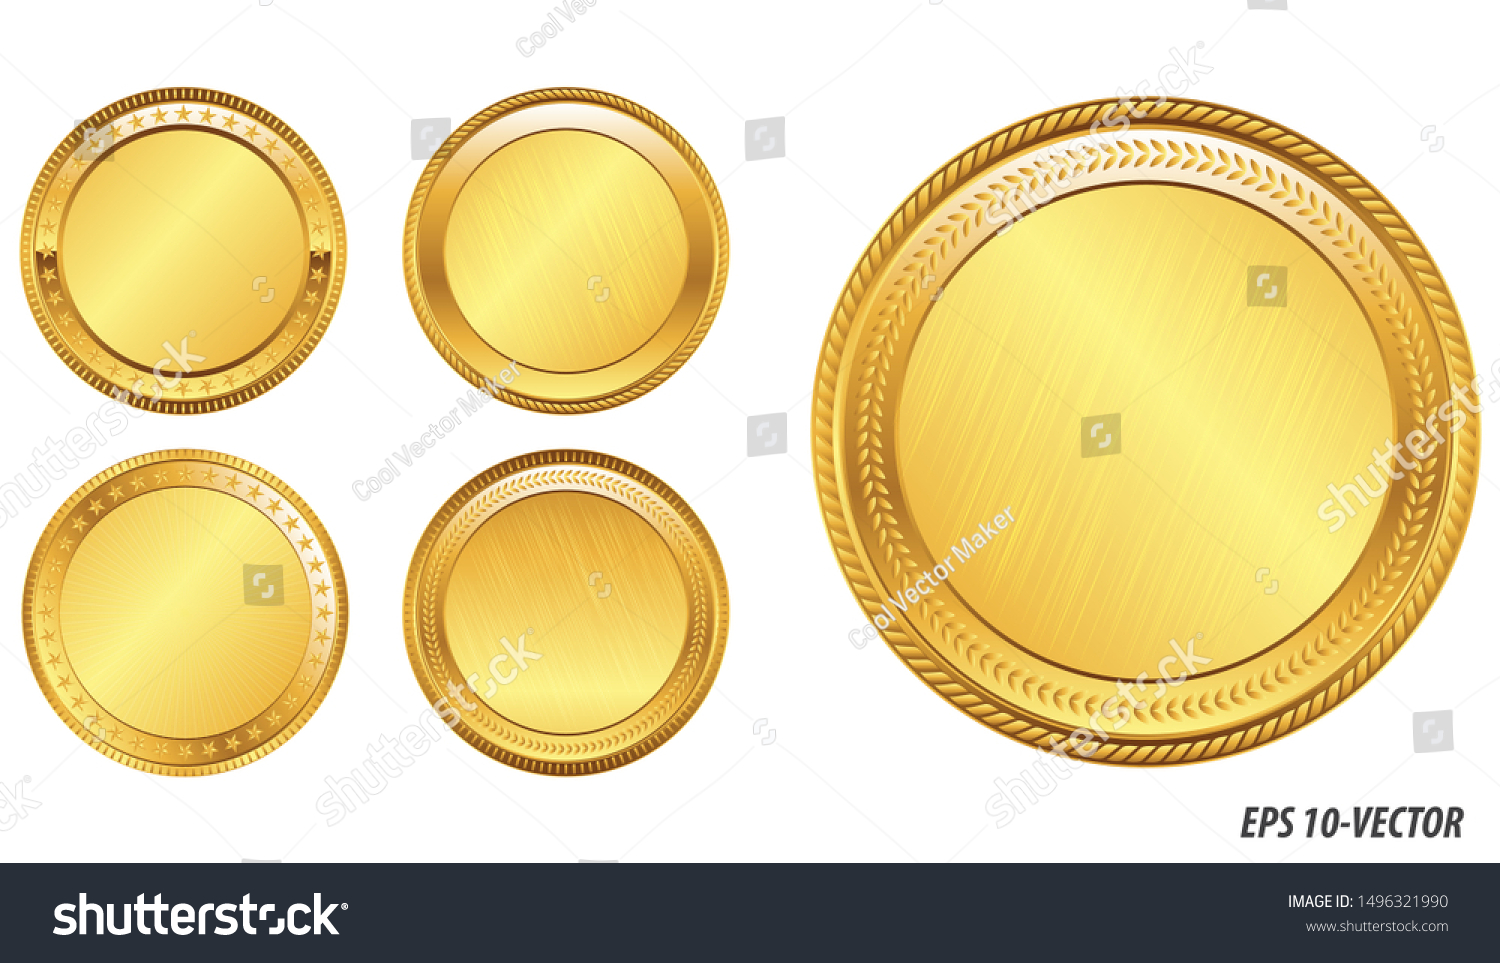 SVG of set of realistic gold coin isolated or crypto currency golden or digital currency bitcoin illustration or digital payment currency  etherum litecoin dogecoin to the moon concept. eps vector svg